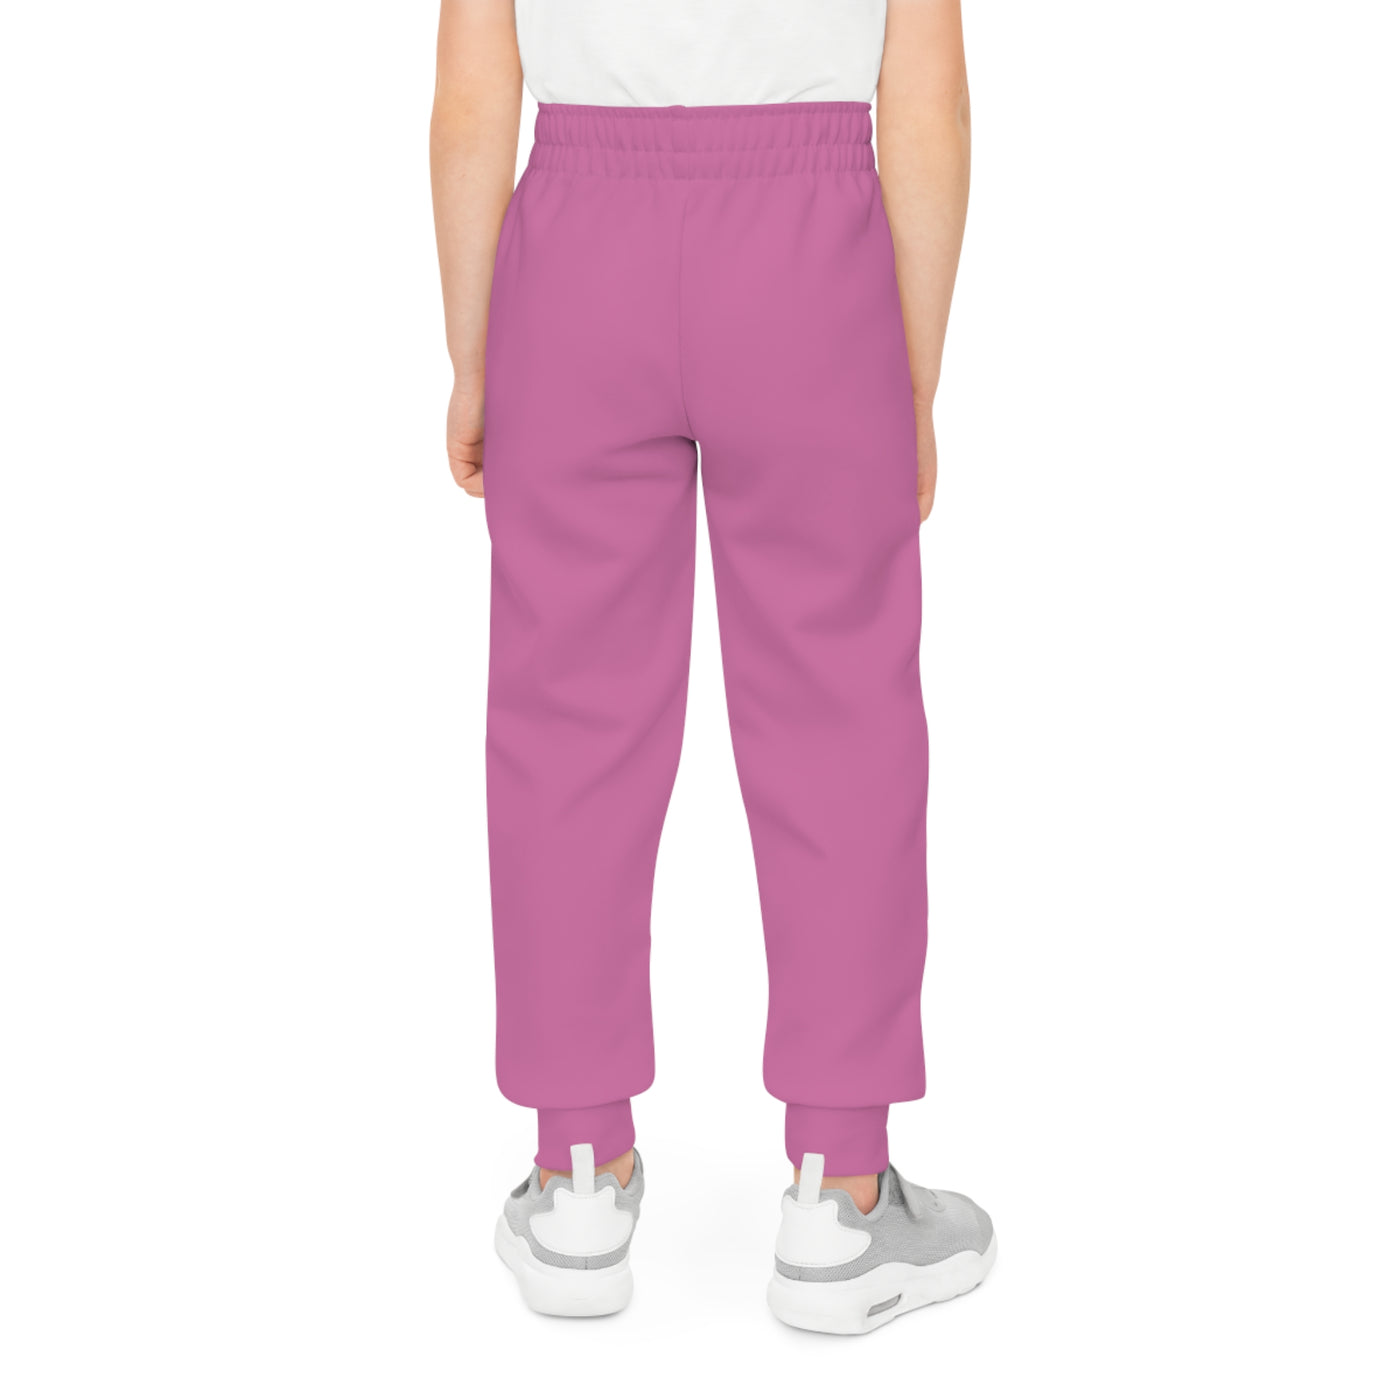 Colorful Crown Kids Joggers (Pink)